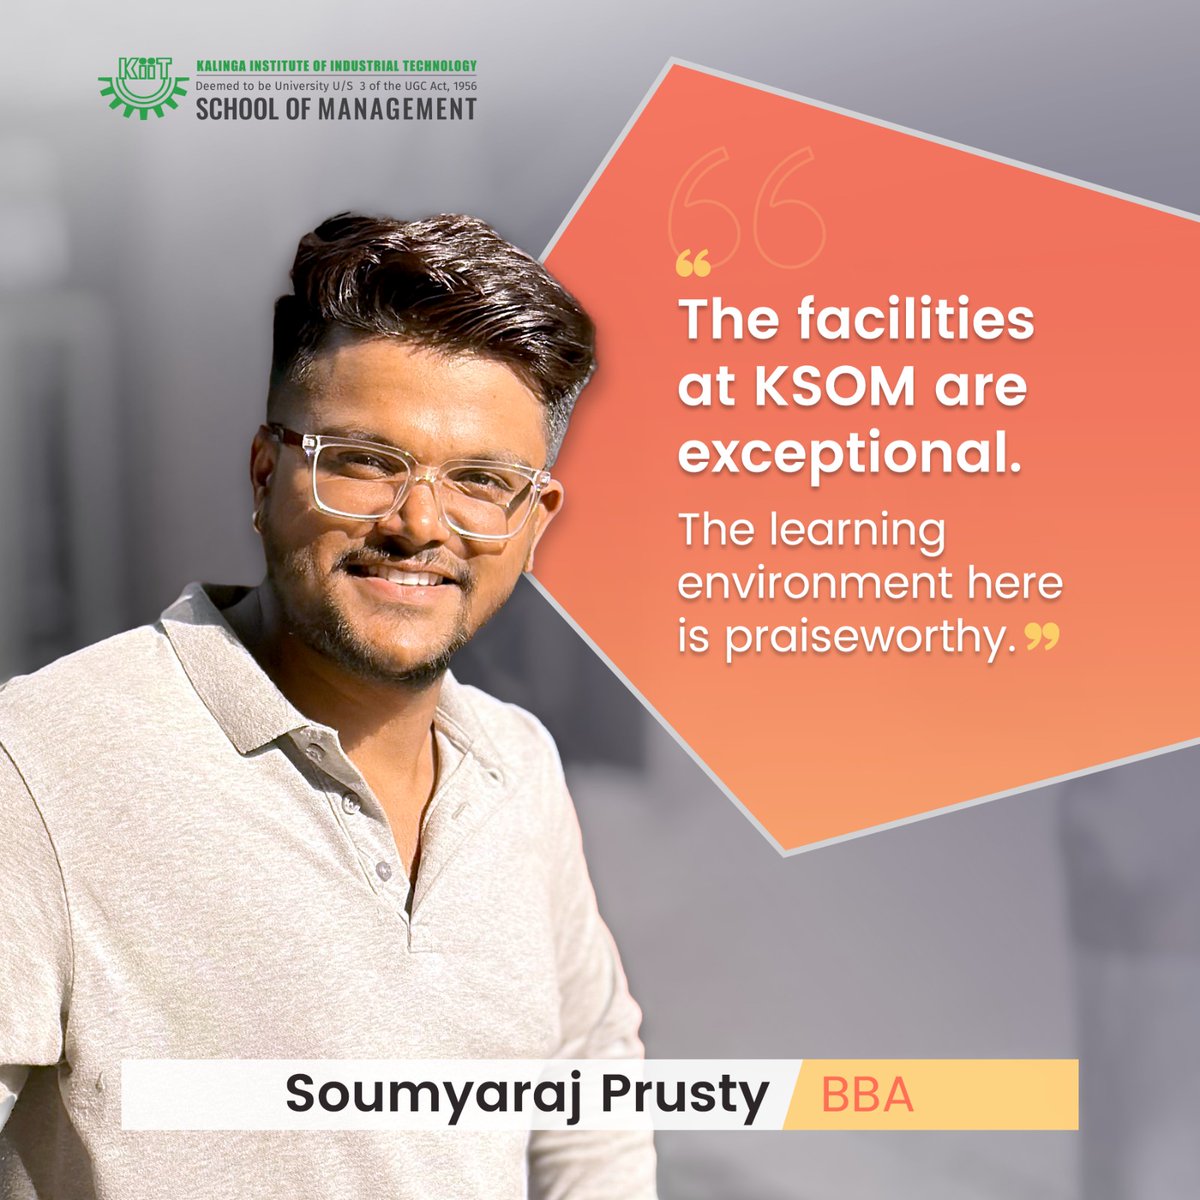 KSOM has stretched me to reach my full potential through its learning process, says Soumyaraj Prusty, our BBA student, sharing his experience at KSOM.

#ksombbsr #testimonial #BBA #lifeatksom #Bhubaneswar #opportunities #kiit #bschool